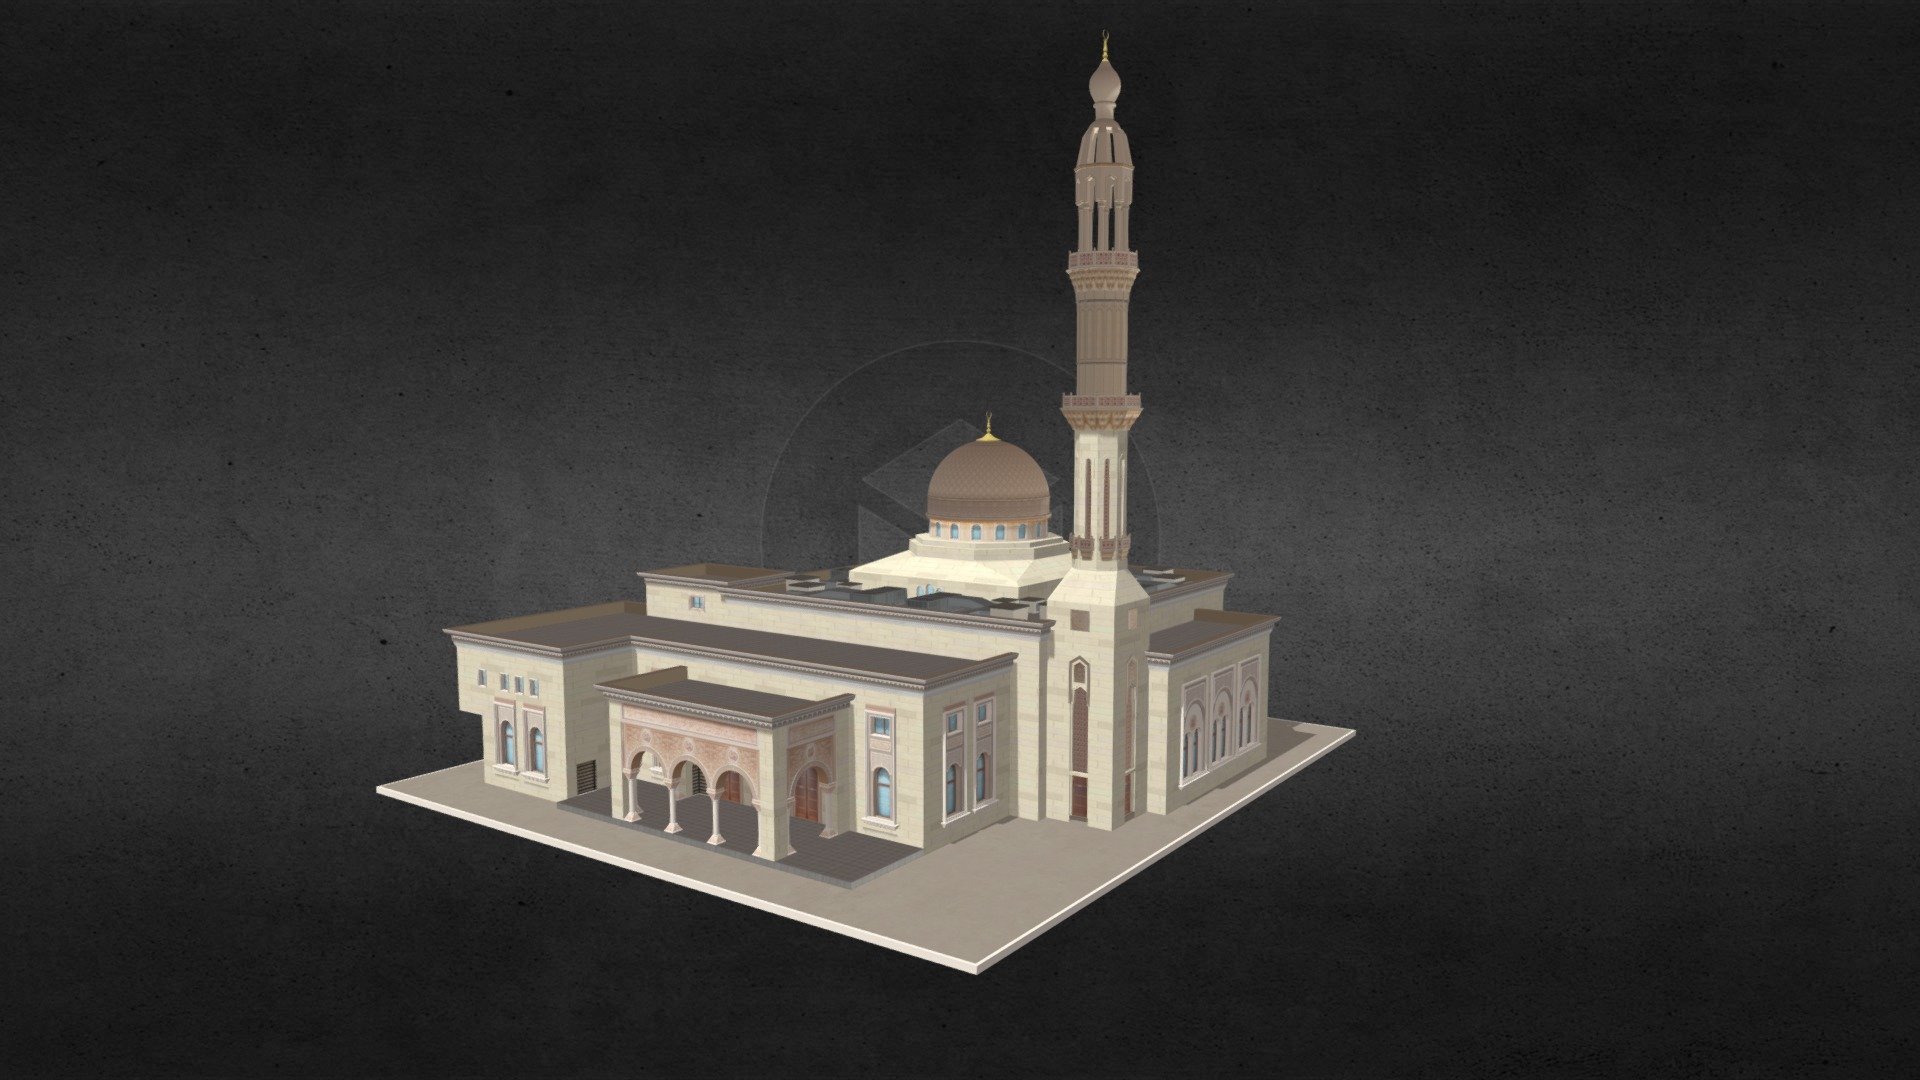 Al Rahim Mosque Dubai Marina
Originally created with 3ds Max 2015 and rendered in V-Ray 3.0.

Total Poly Counts:
Poly Count = 50252
Vertex Count = 66709

Visit This 3d Model
https://nuralam3d.blogspot.com/2023/08/al-rahim-mosque-dubai-marina.html - Al Rahim Mosque Dubai Marina - 3D model by nuralam018 3d model